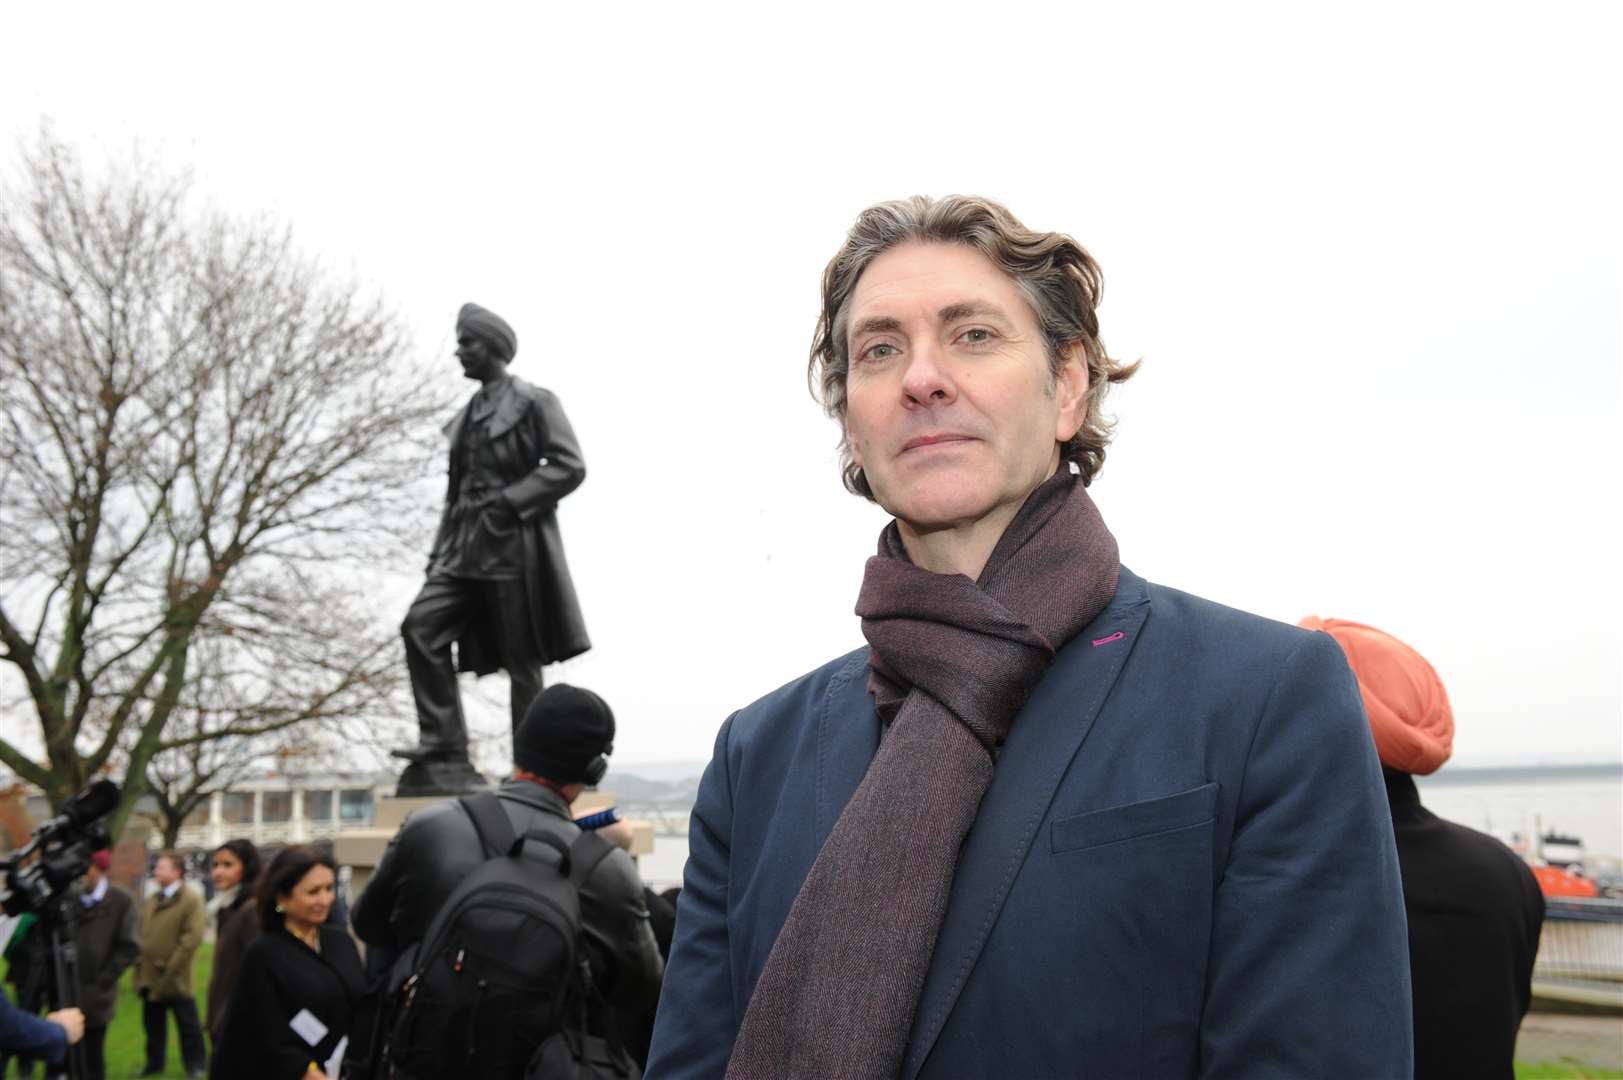 Creator Douglas Jennings received the Marsh Award for Excellence in Public Sculpture at a ceremony in London.